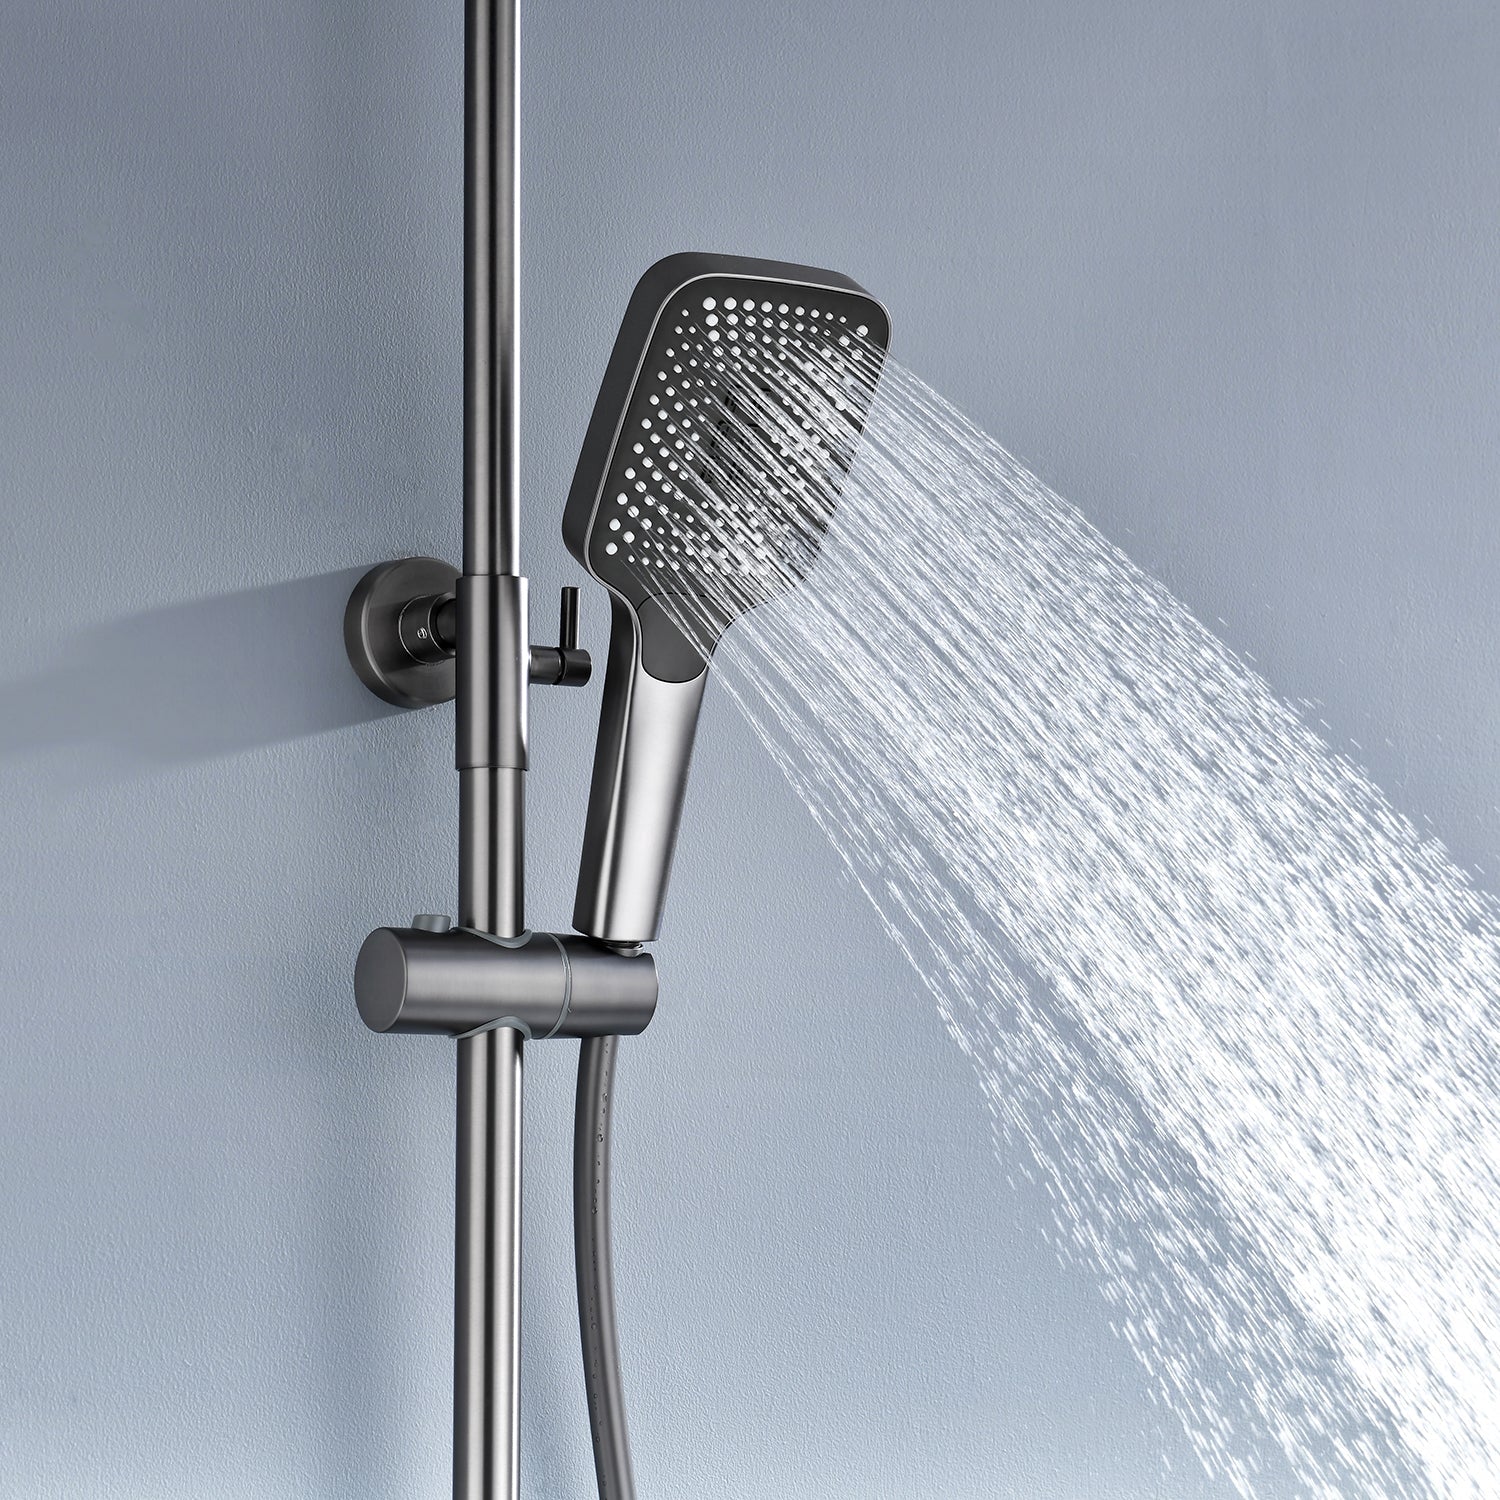 Lefton Digital Shower System with Temperature Display and 4 Water Outlet Modes-SST2202